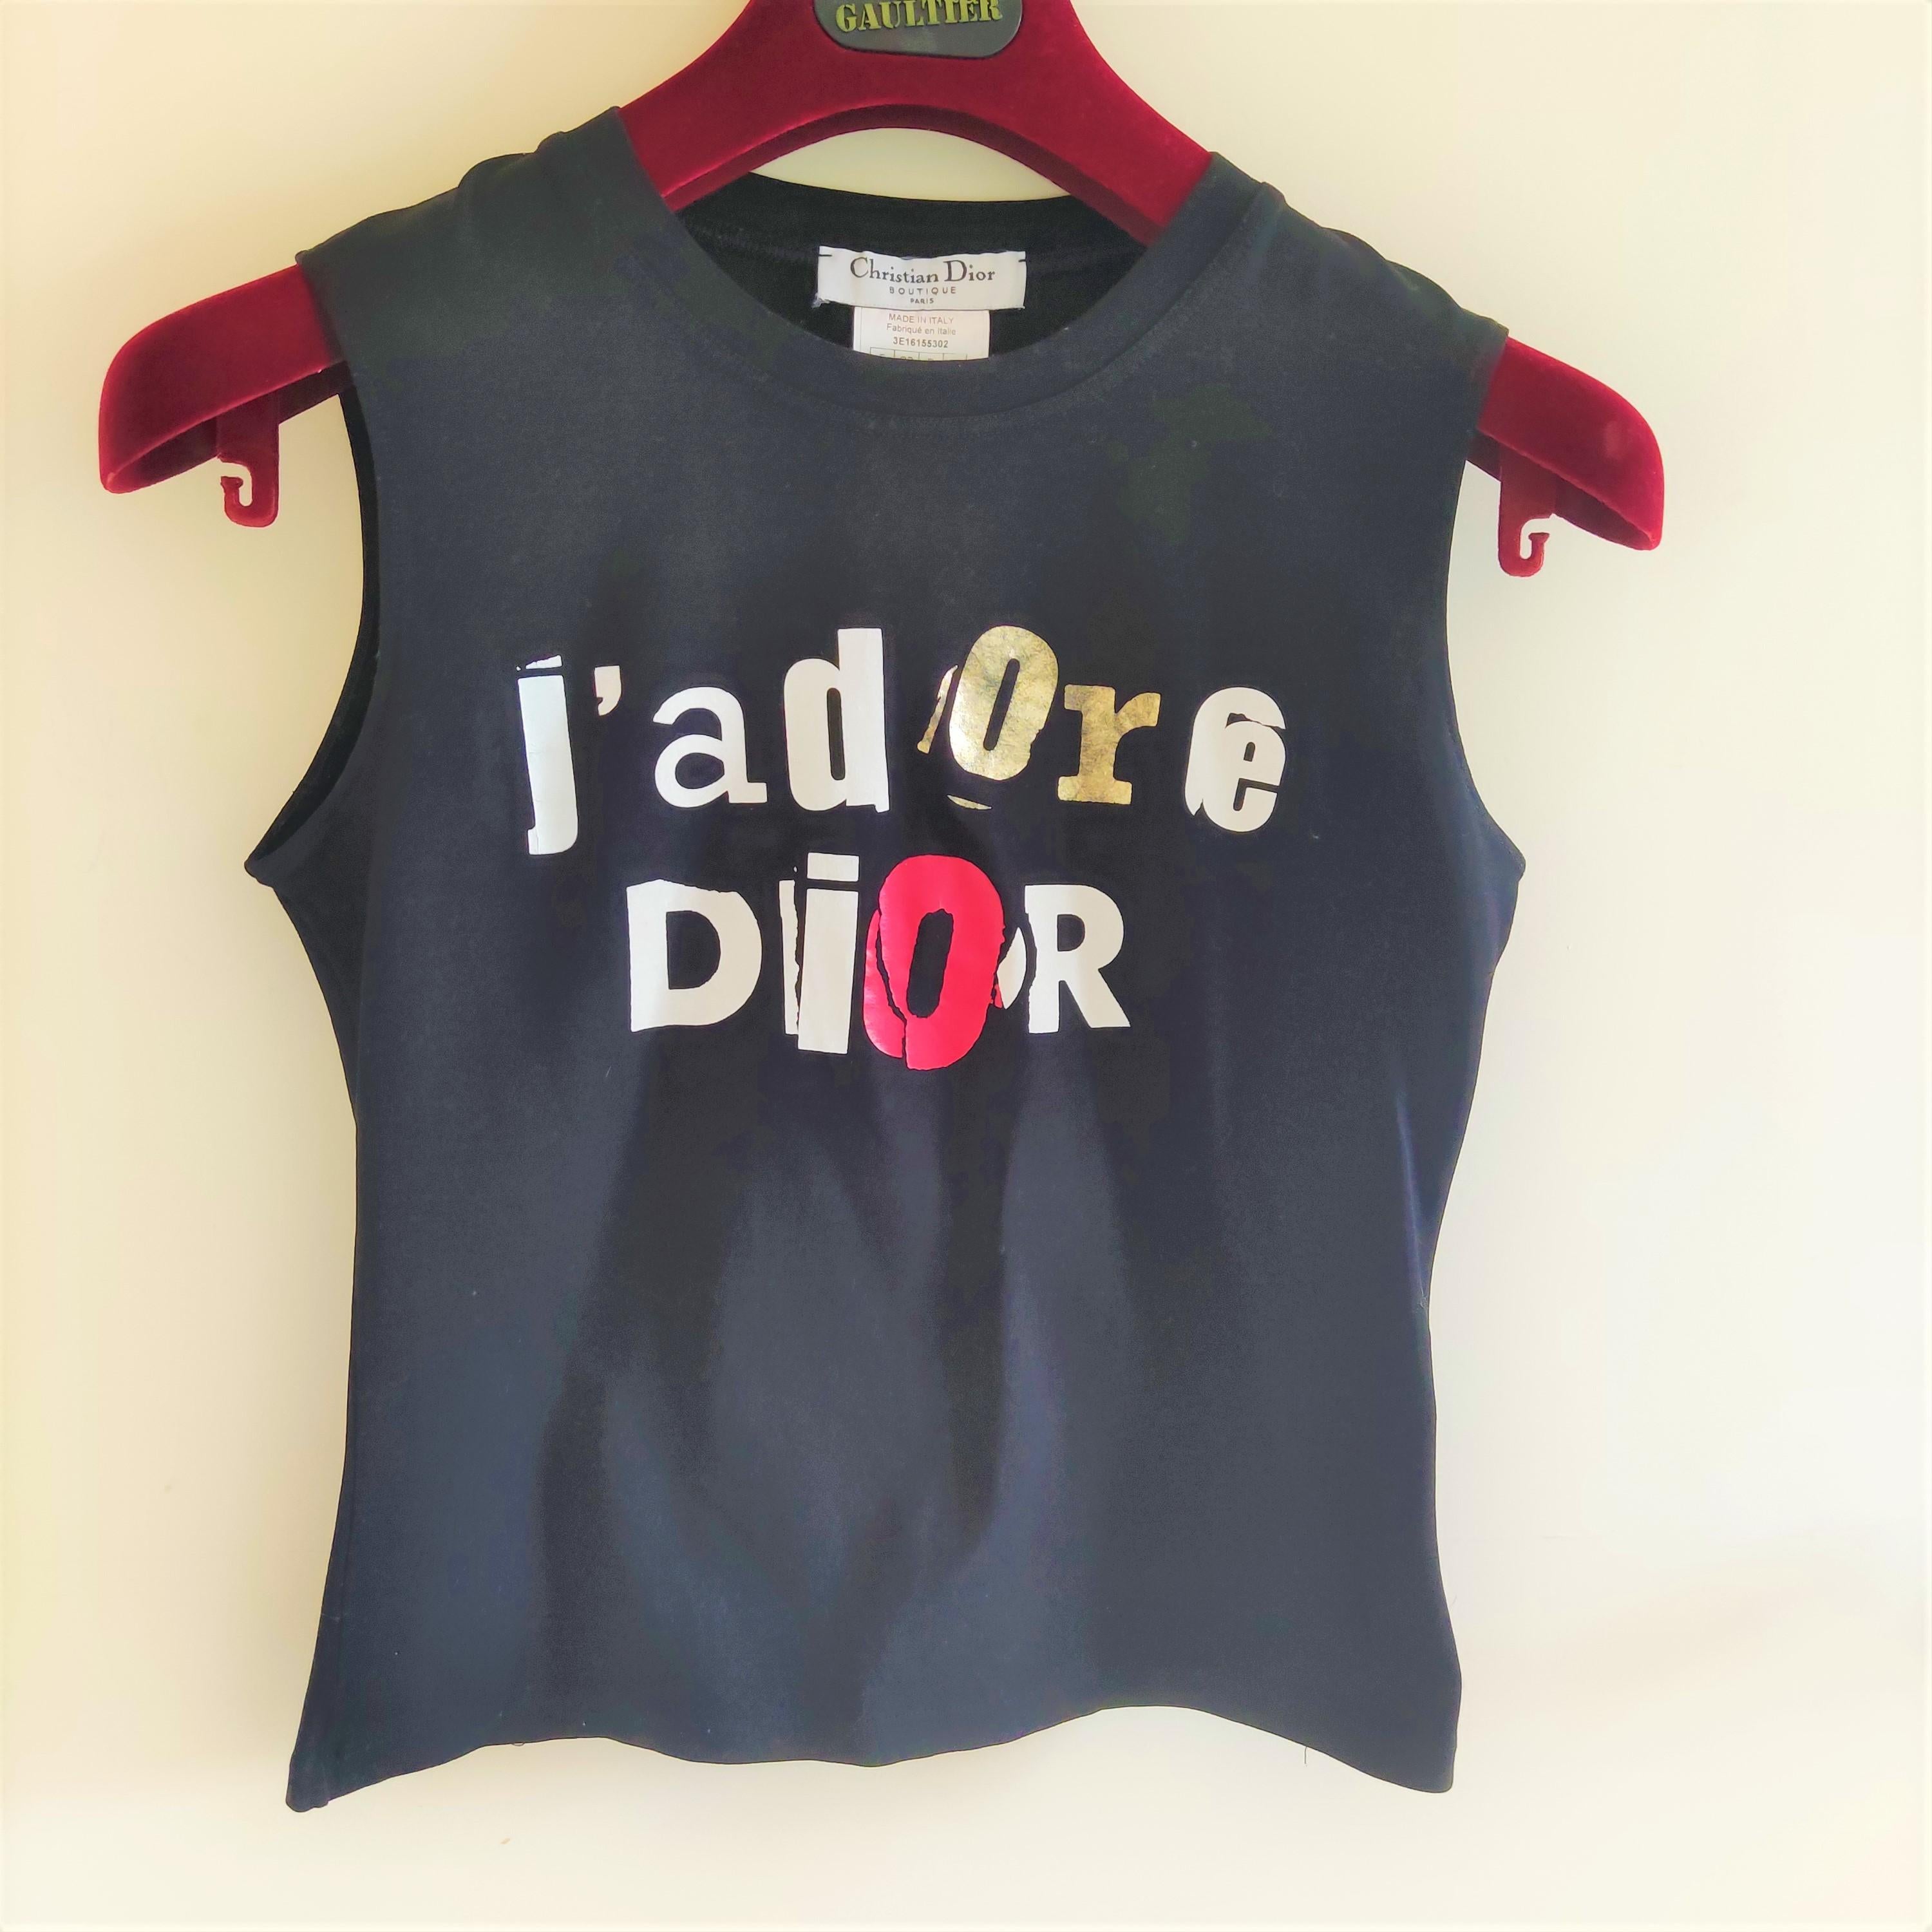 J`adore Dior top by Christion Dior! 
Excellent condition! 

Size: F38 / GB10 / D36 / USA 6. (Like size Small/Medium)  
Length: 51 cm / 20 inch
Armpit to armpit: 40 cm / 15.7 inch

Made in France!
